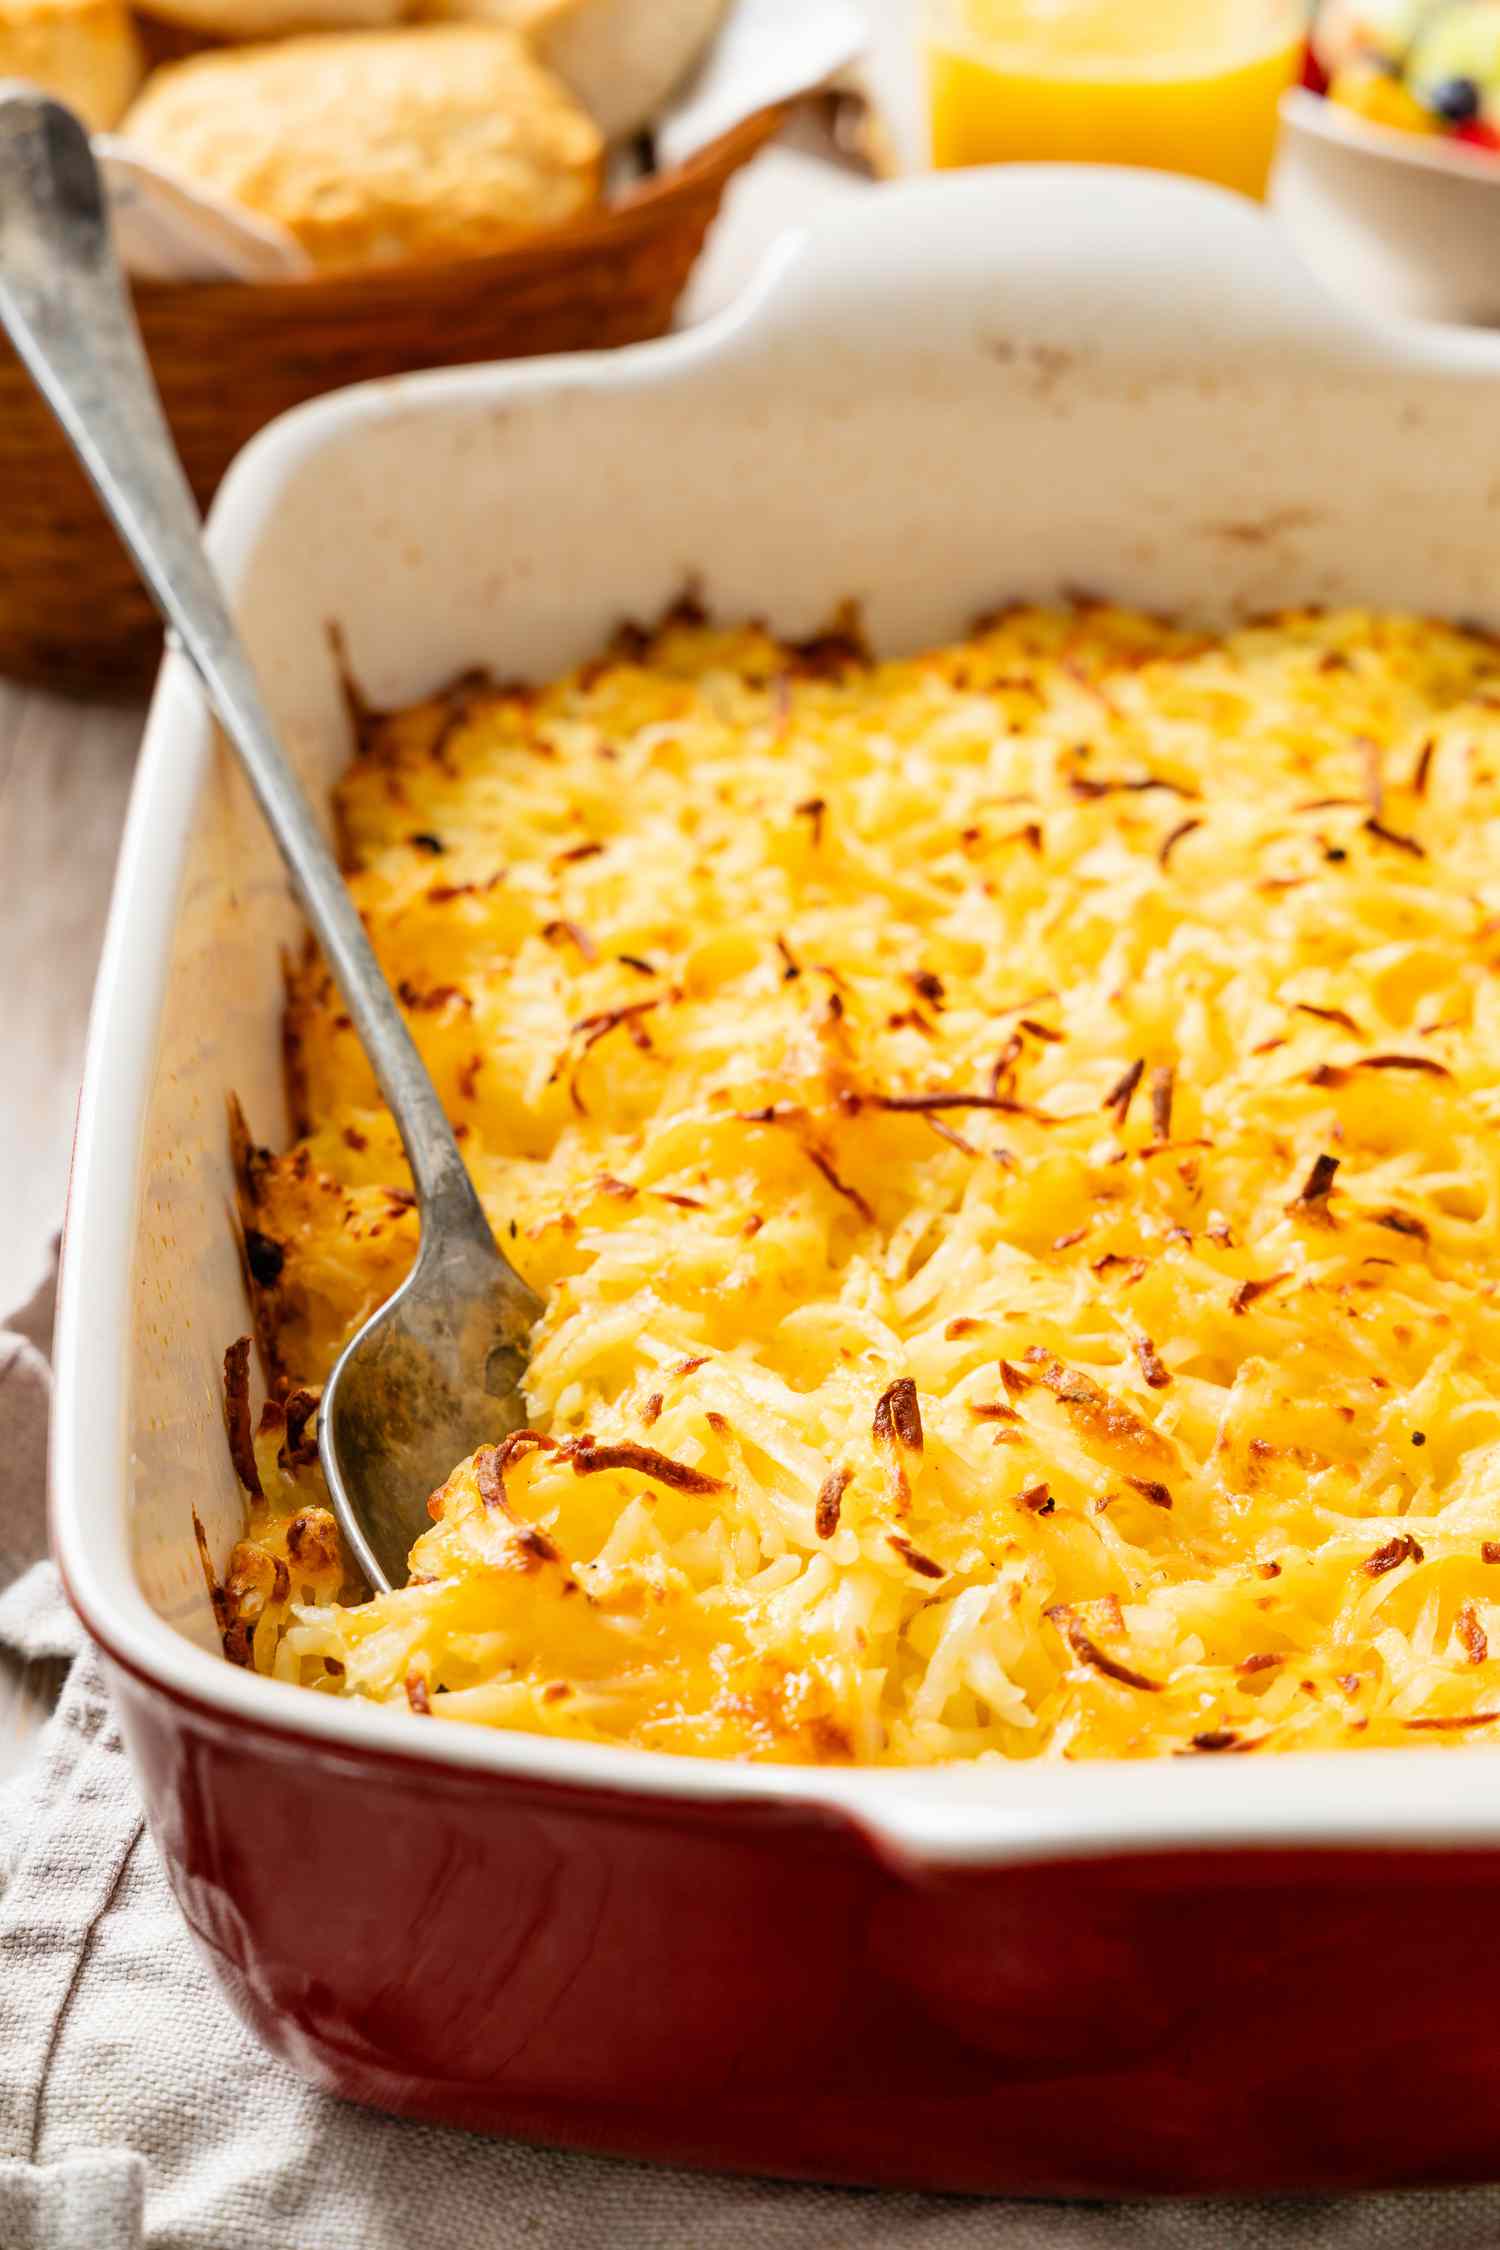 Spoon digging into copycat Cracker Barrel hash brown casserole in a casserole dish with a basketful of biscuits and a glass of orange juice in the background